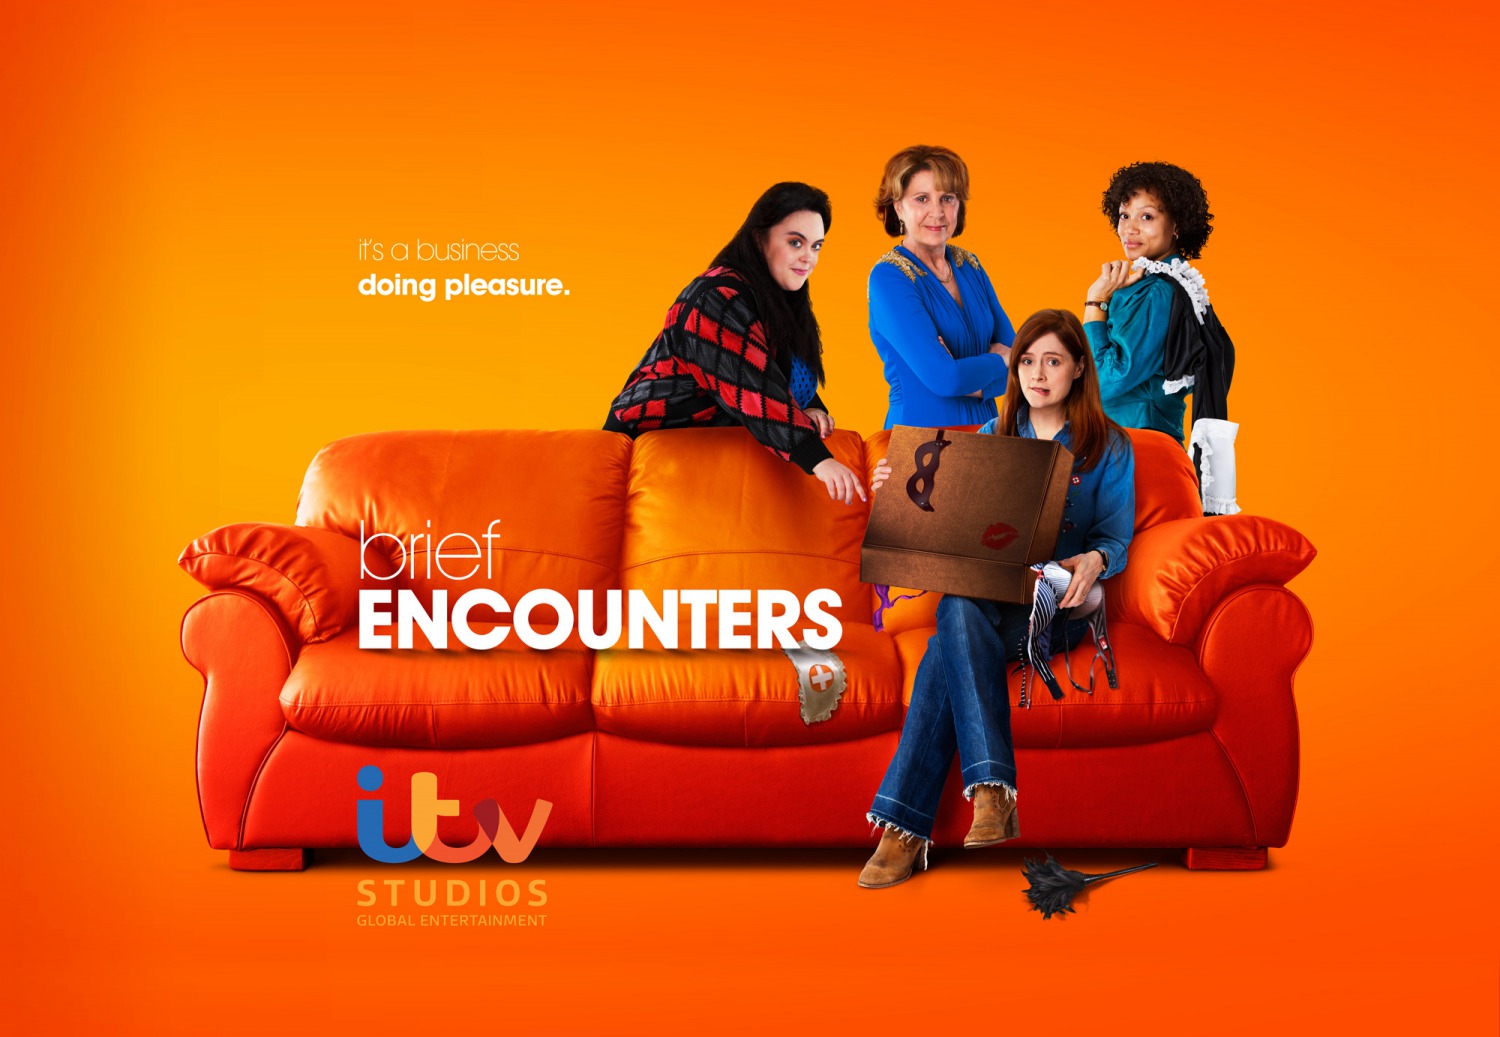 Extra Large TV Poster Image for Brief Encounters 